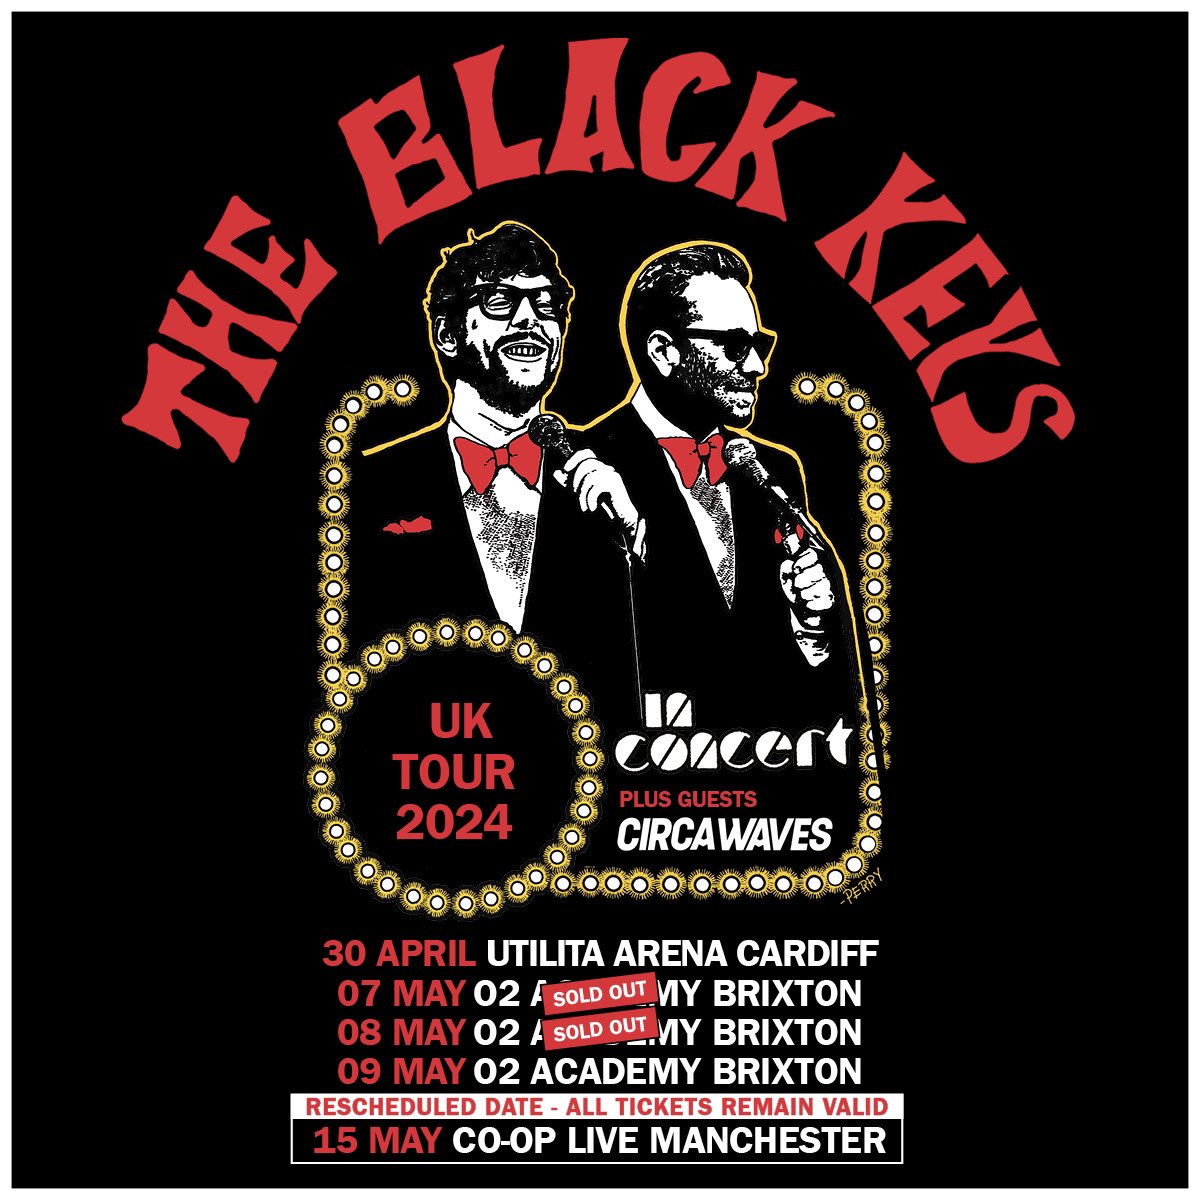 THE BLACK KEYS Not long to go until The Black Keys start their UK tour at the arena. Tickets available via the link below🔽 📆 Tuesday 30 April 2024 🎟️ Tickets via bit.ly/BKCdf2024 or call 029 2022 4488